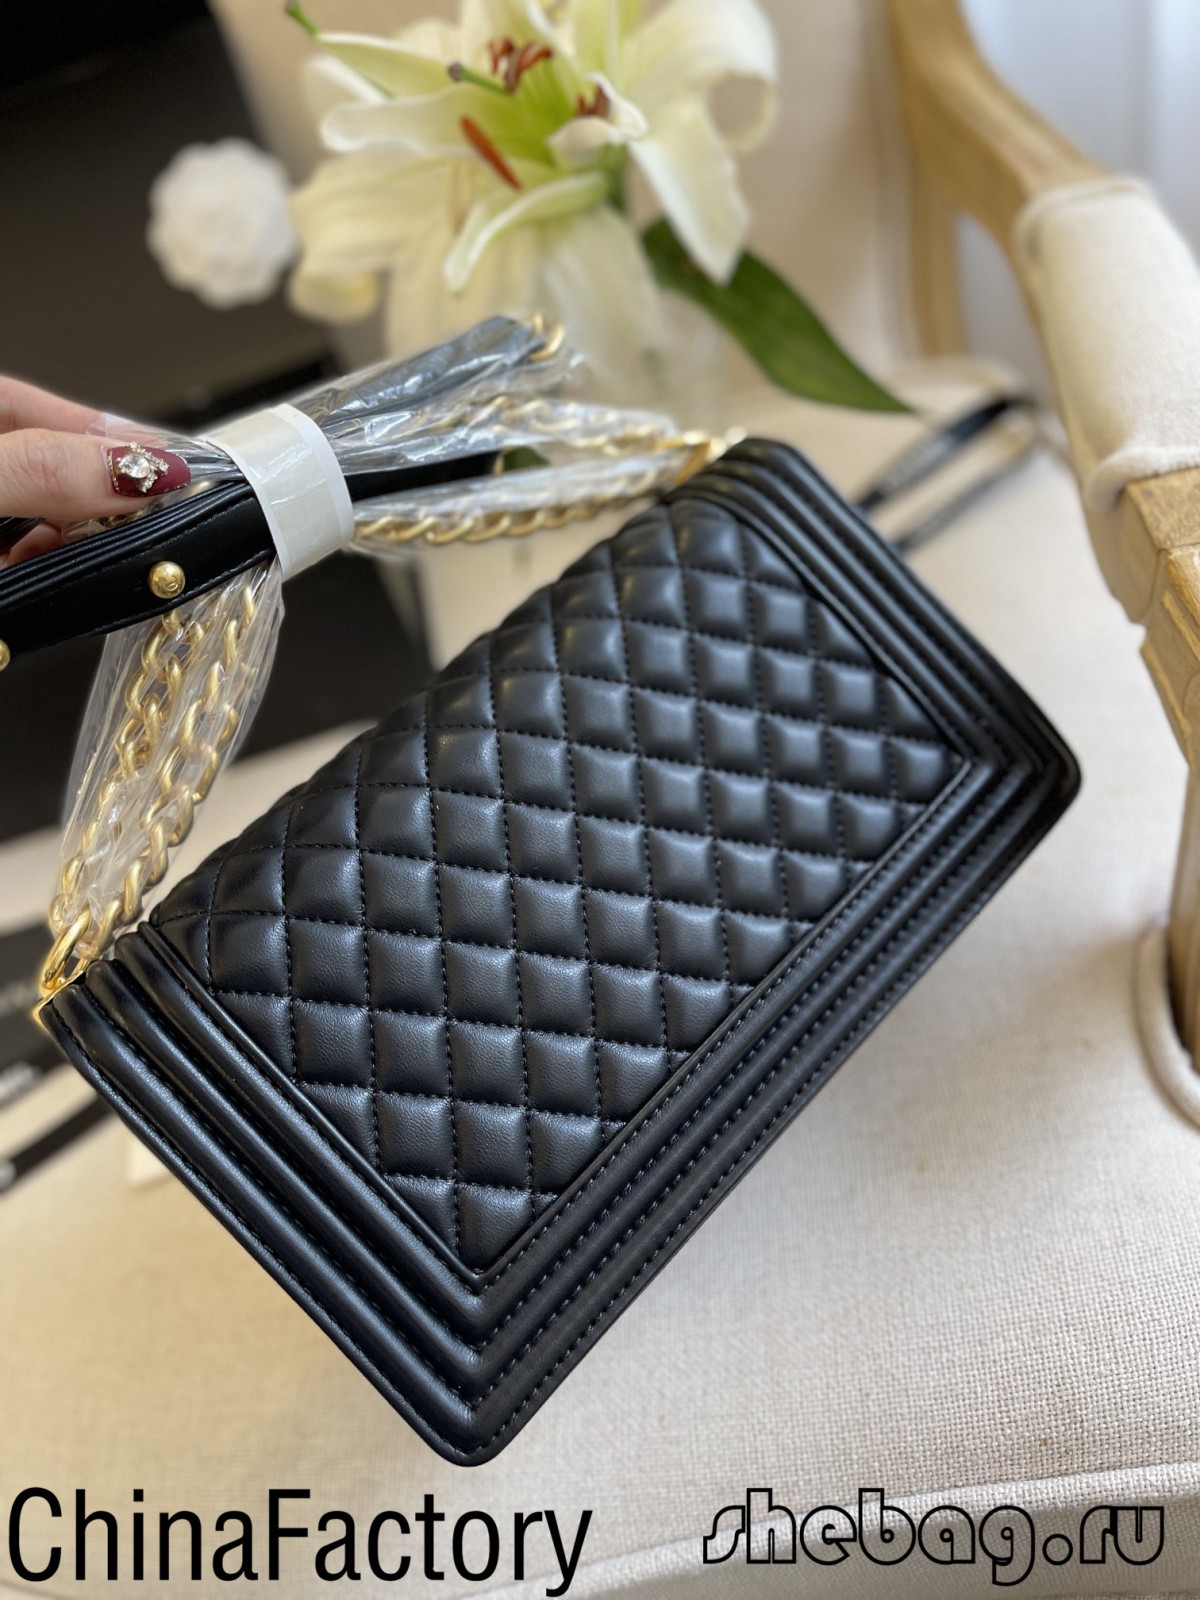 Best quality 2.55 Chanel bag replica sources in China (updated in 2022)-Best Quality Fake designer Bag Review, Replica designer bag ru